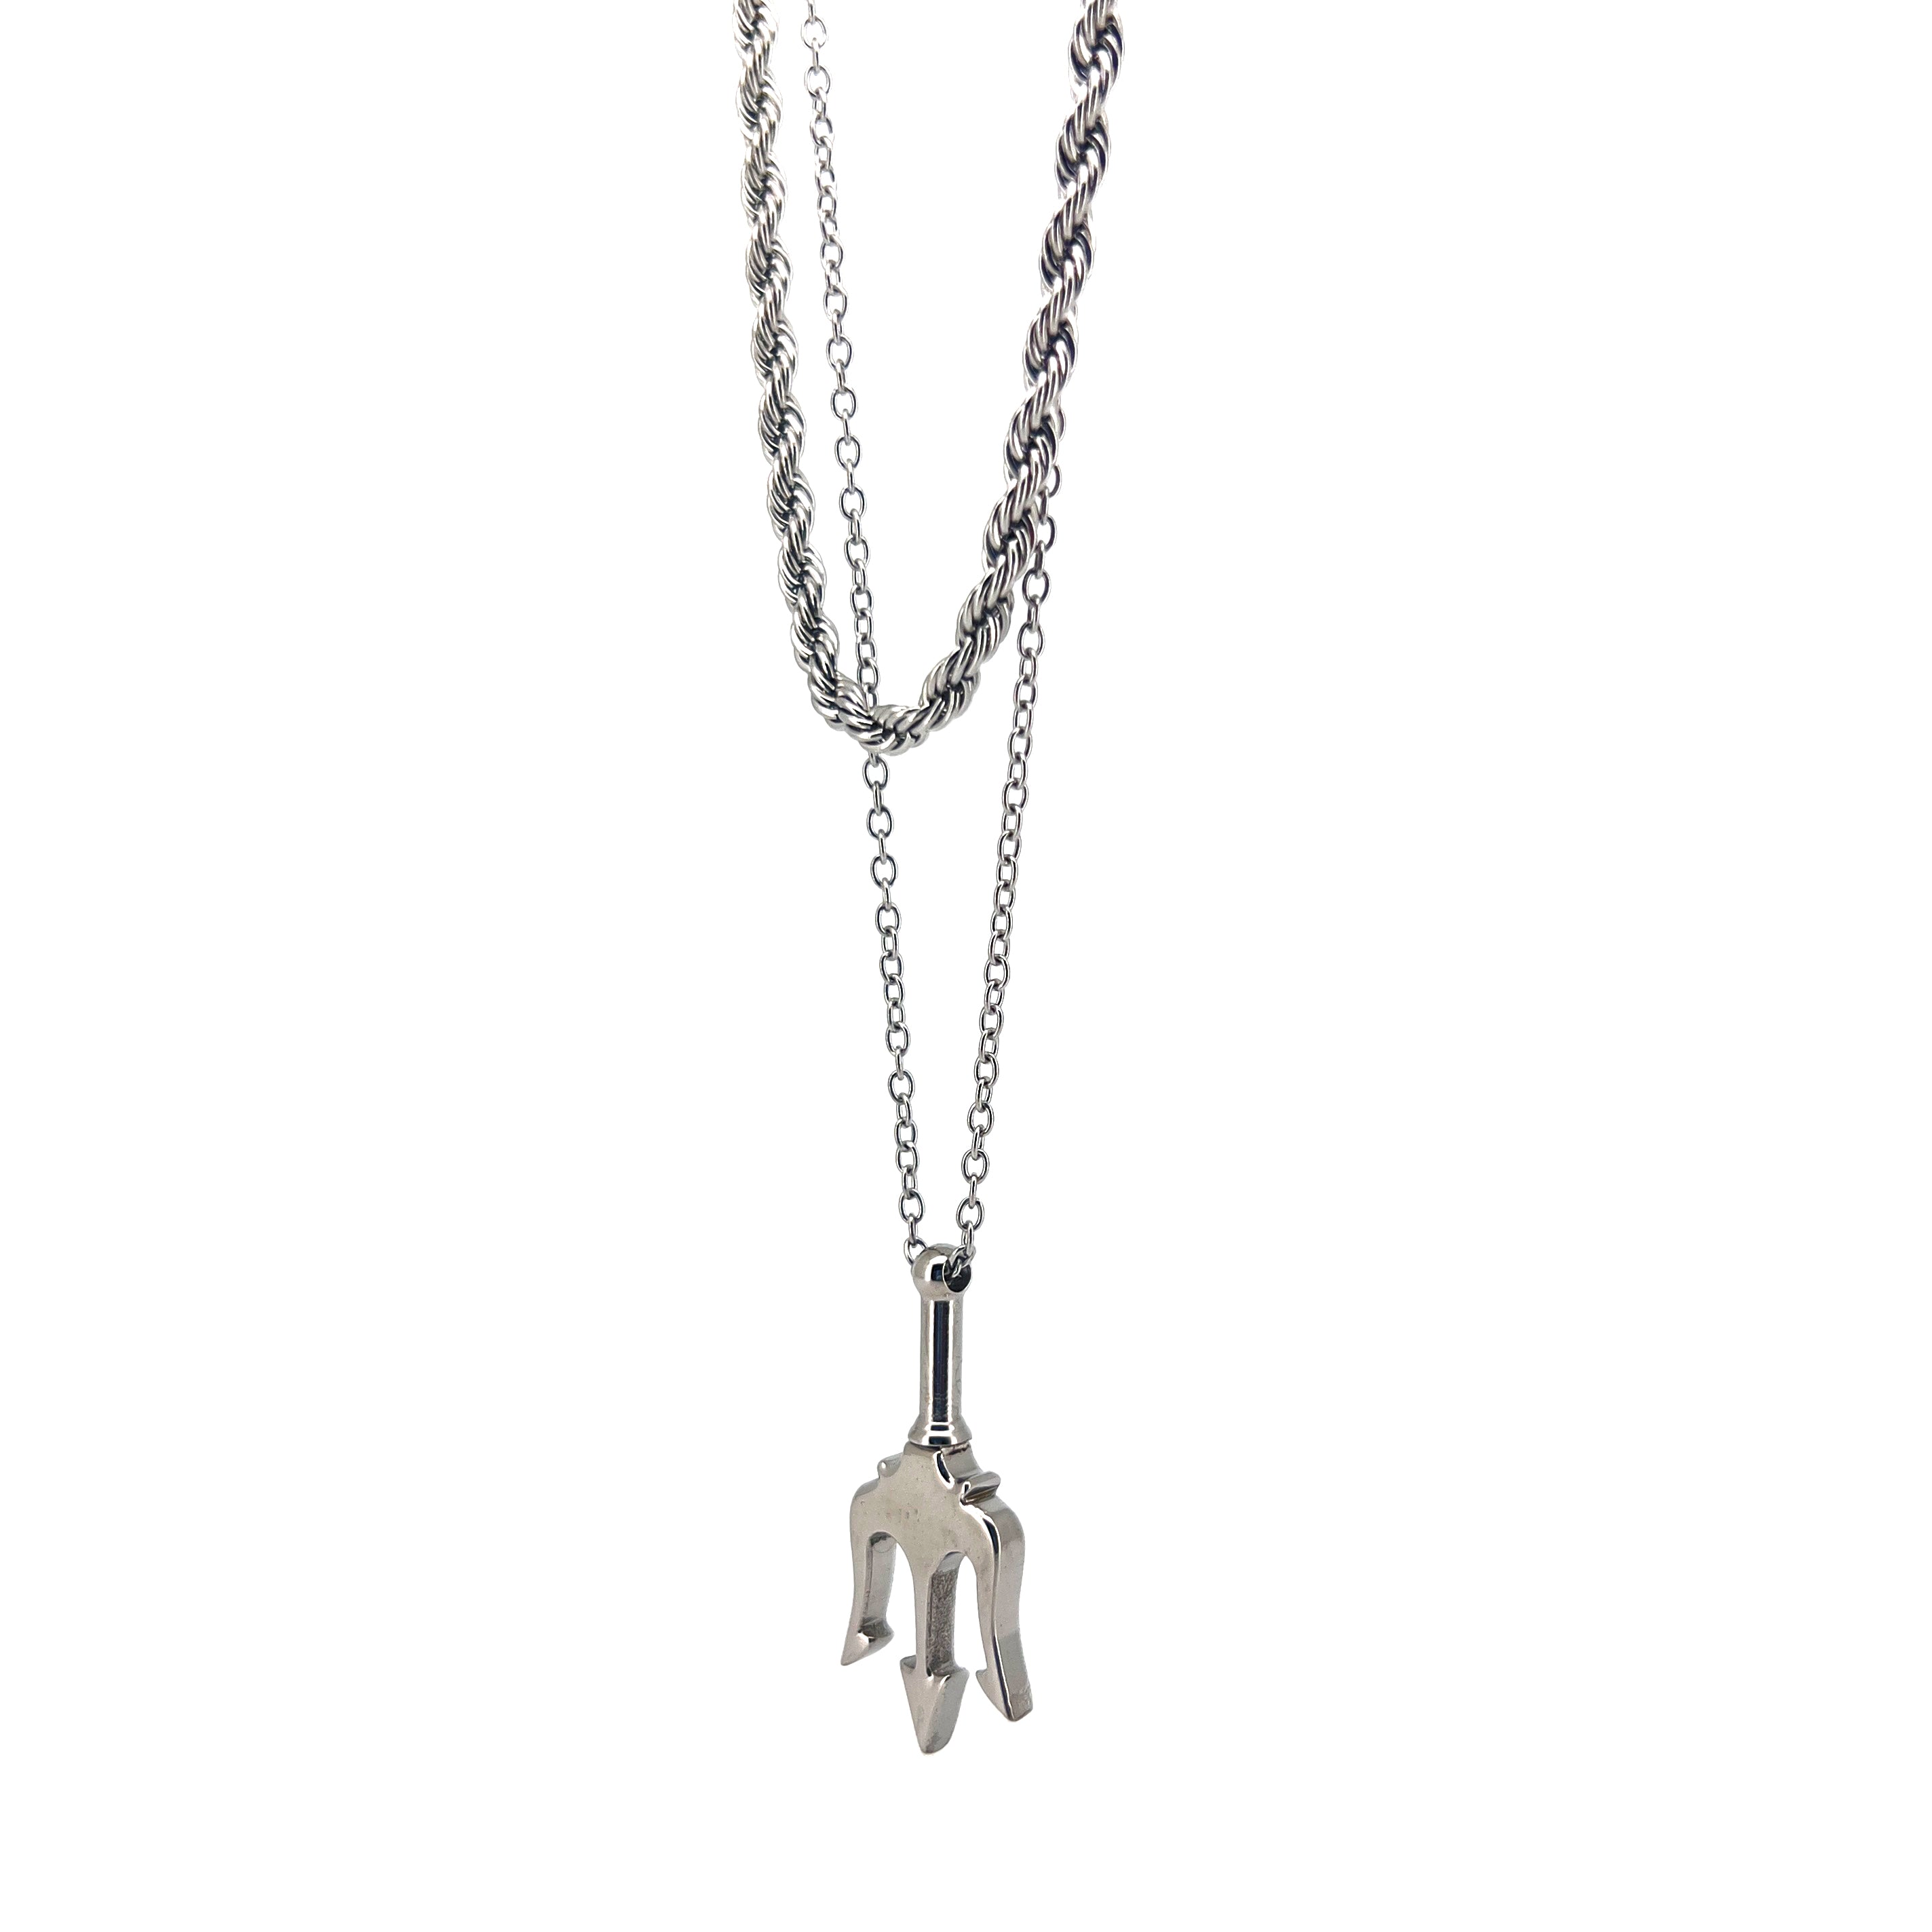 Izan Stainless Steel Trident Pendant & Wheat Chain Necklace Set